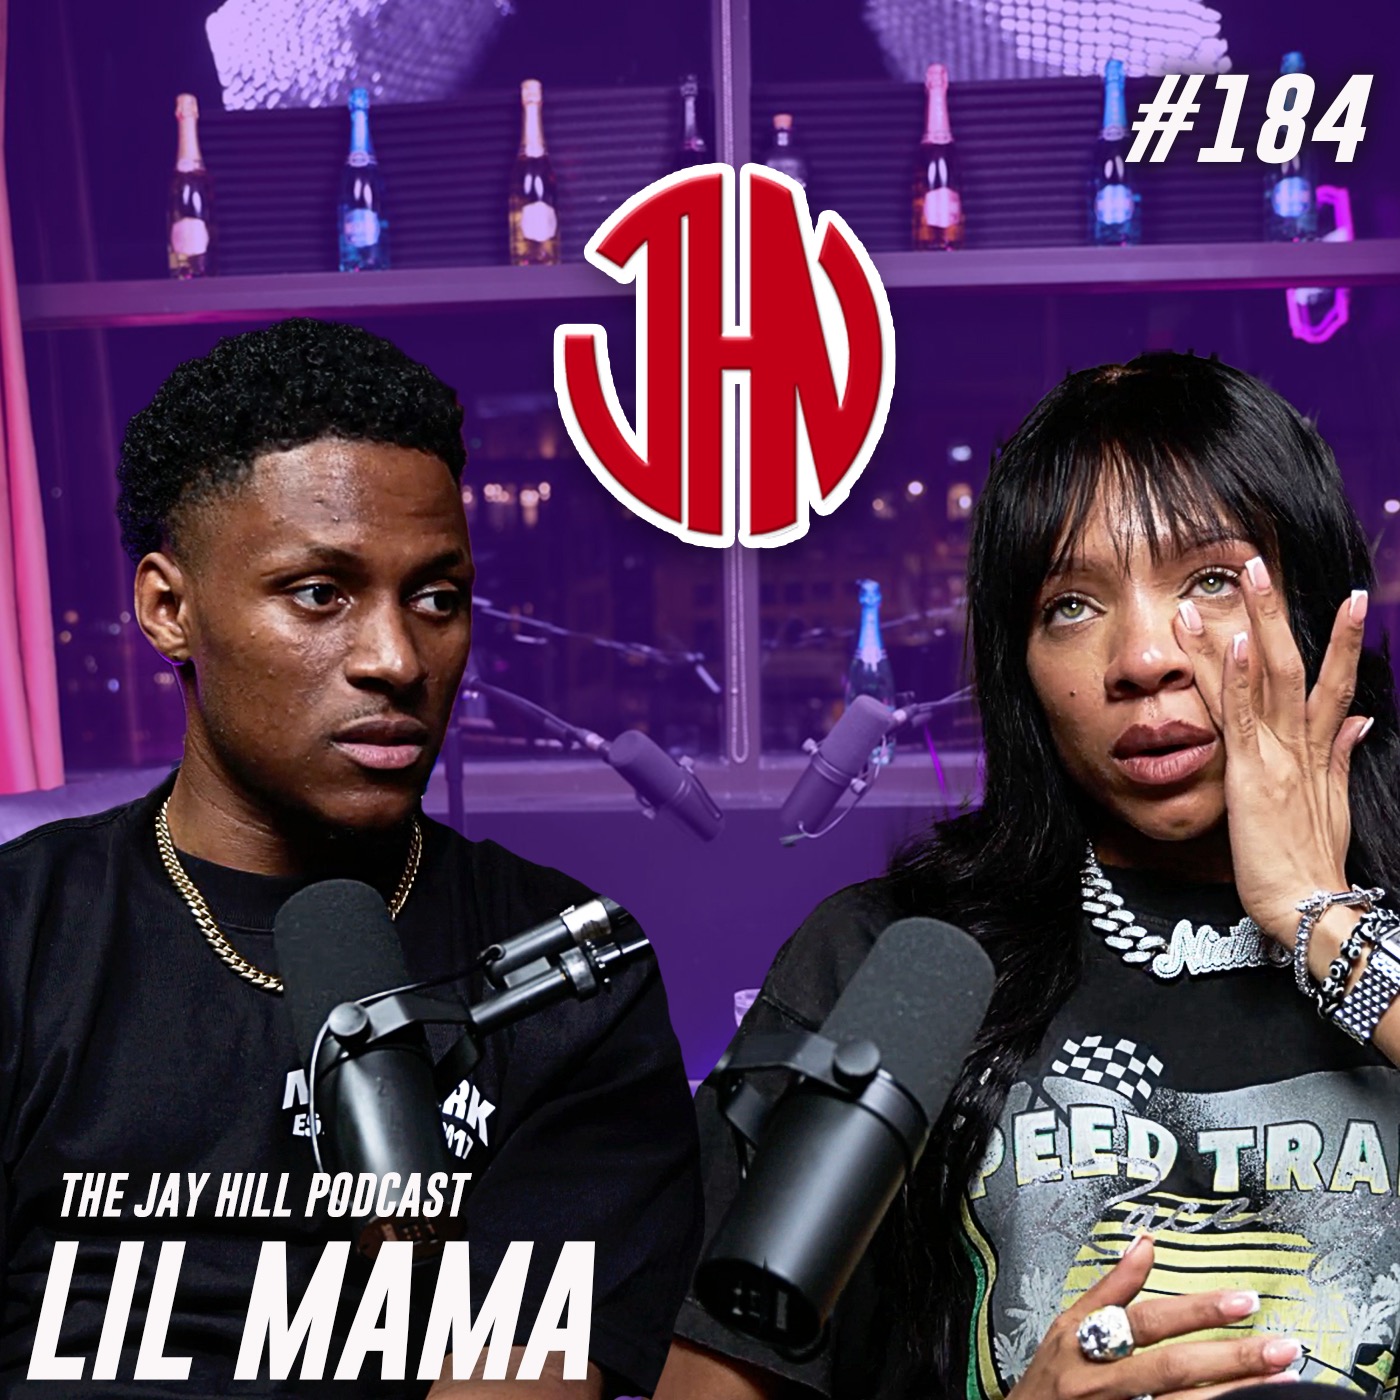 Lil Mama On Losing Interest In Music After Mother Passing, Jay Z Stage Night, New Lipgloss +More